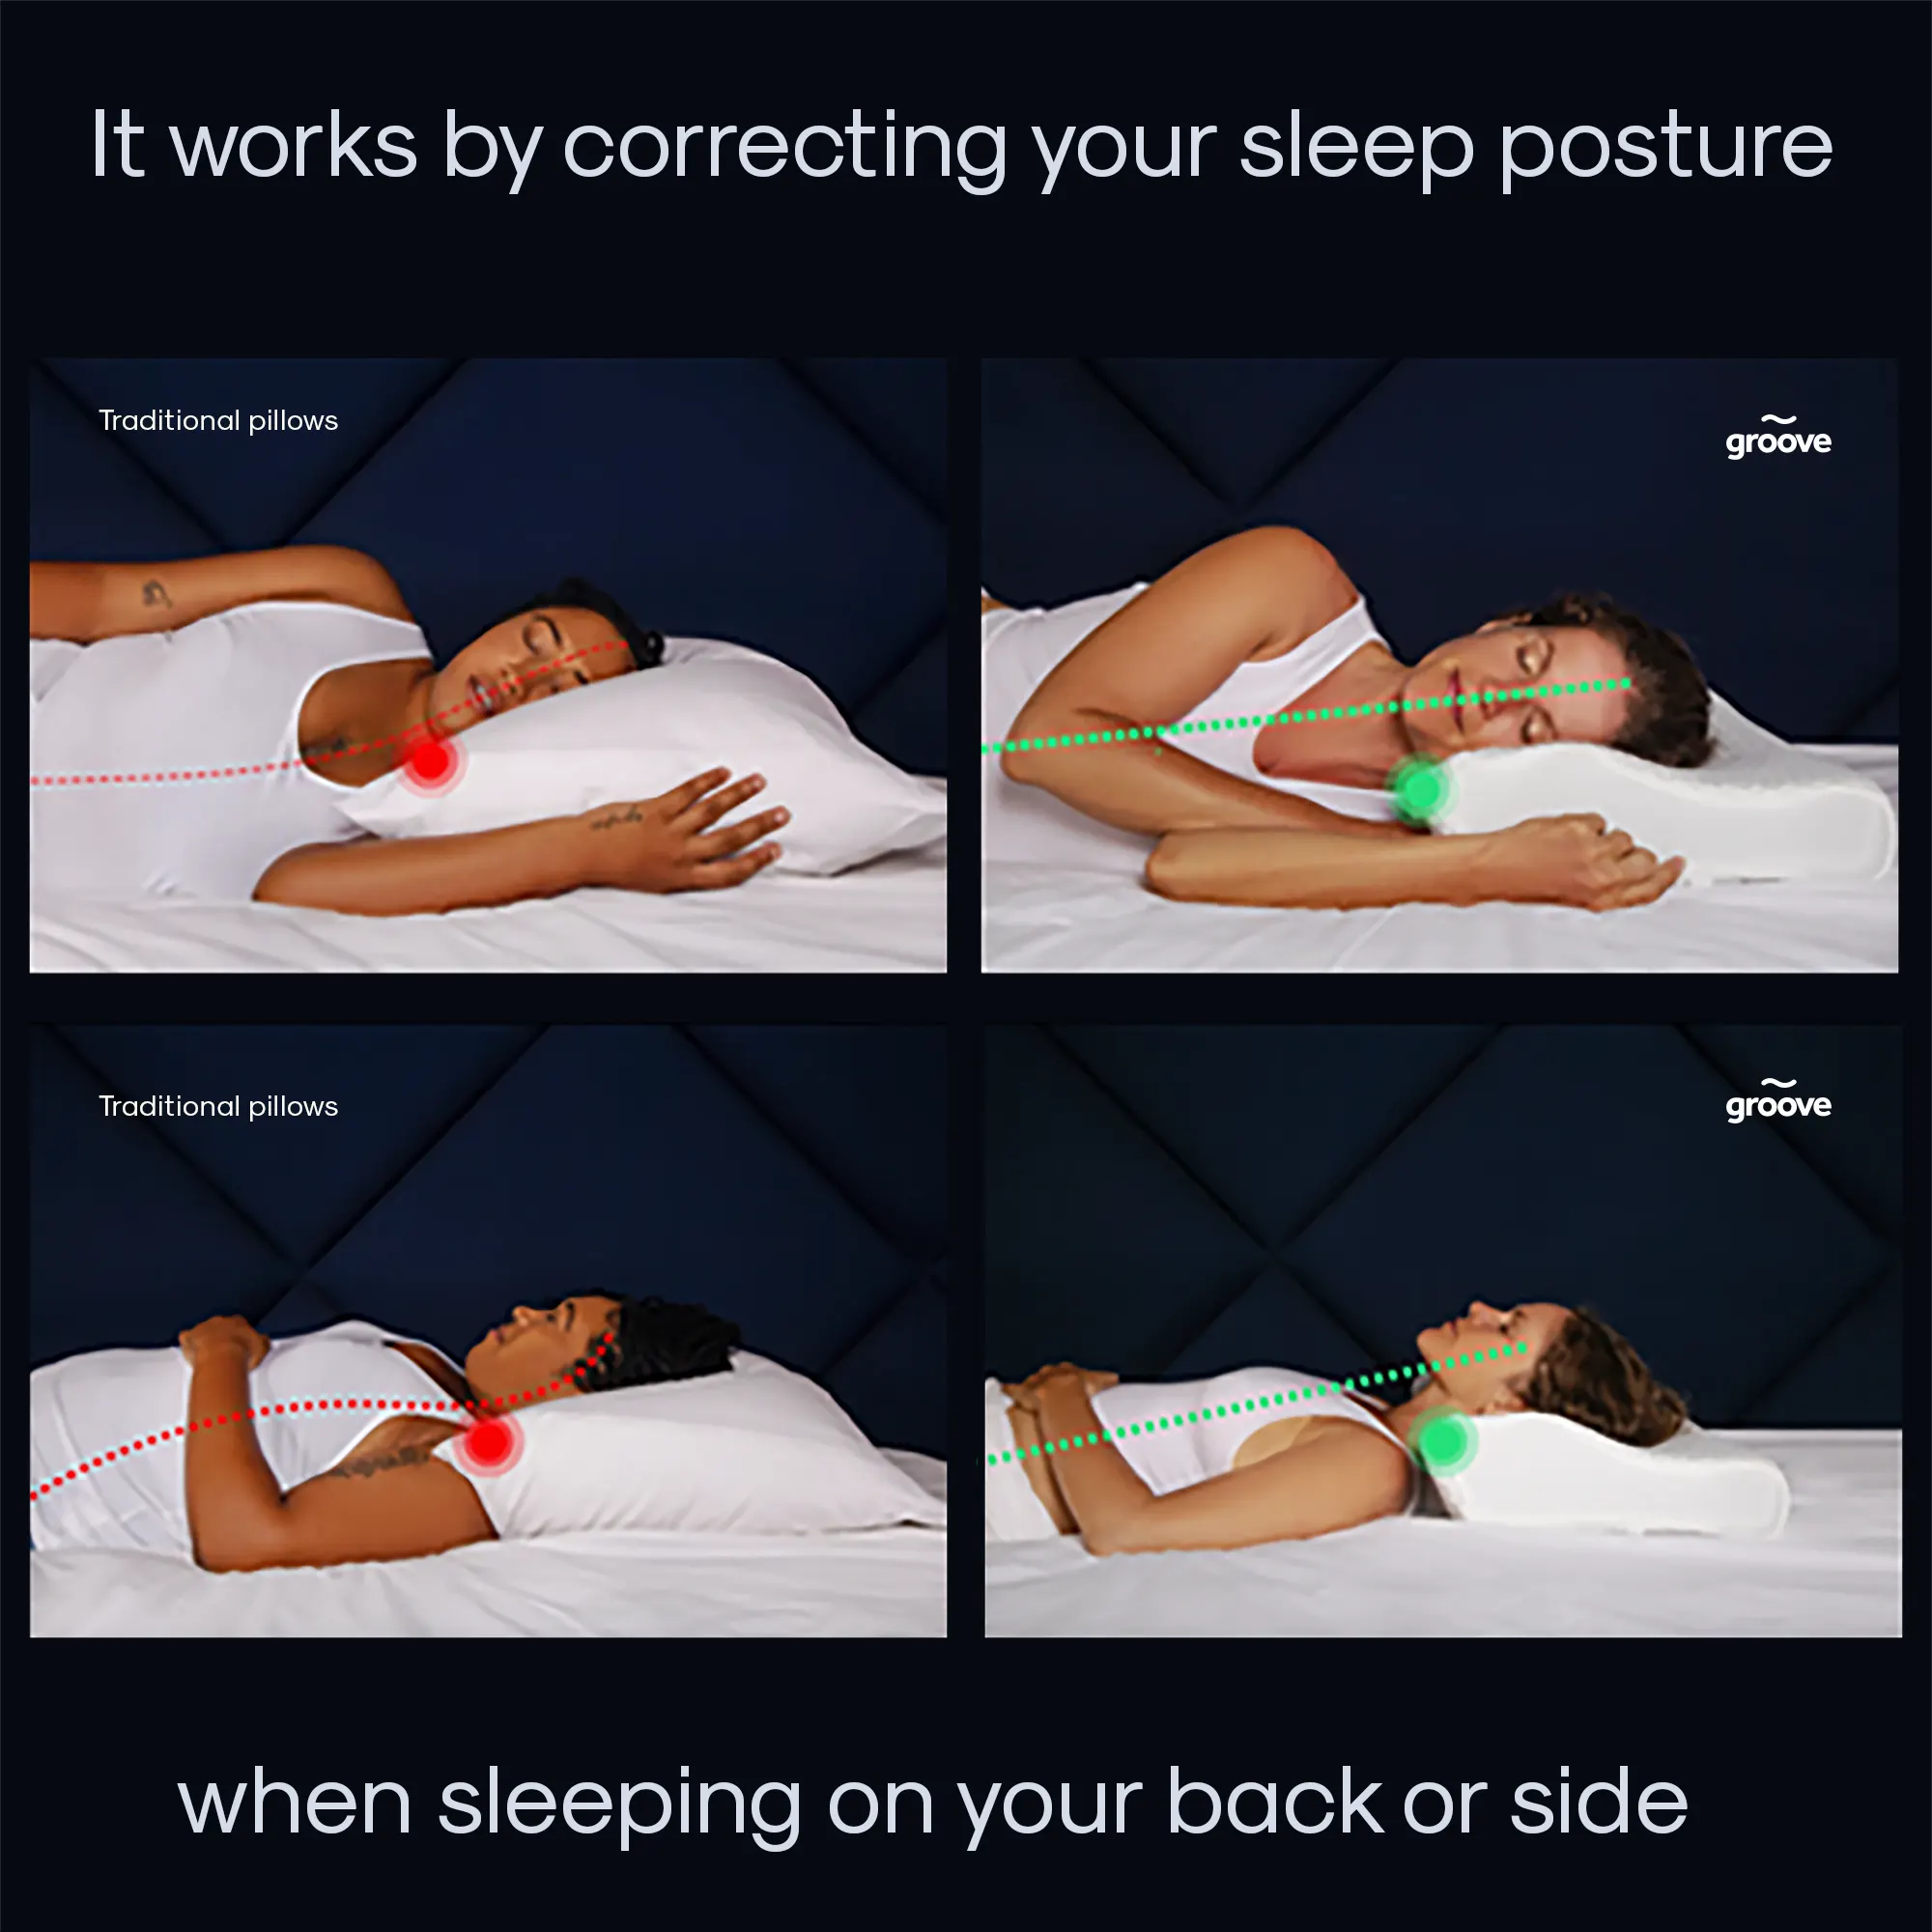 Best Pillow For Neck Pain  Pillow For Proper Spine Alignment -  properlivingco